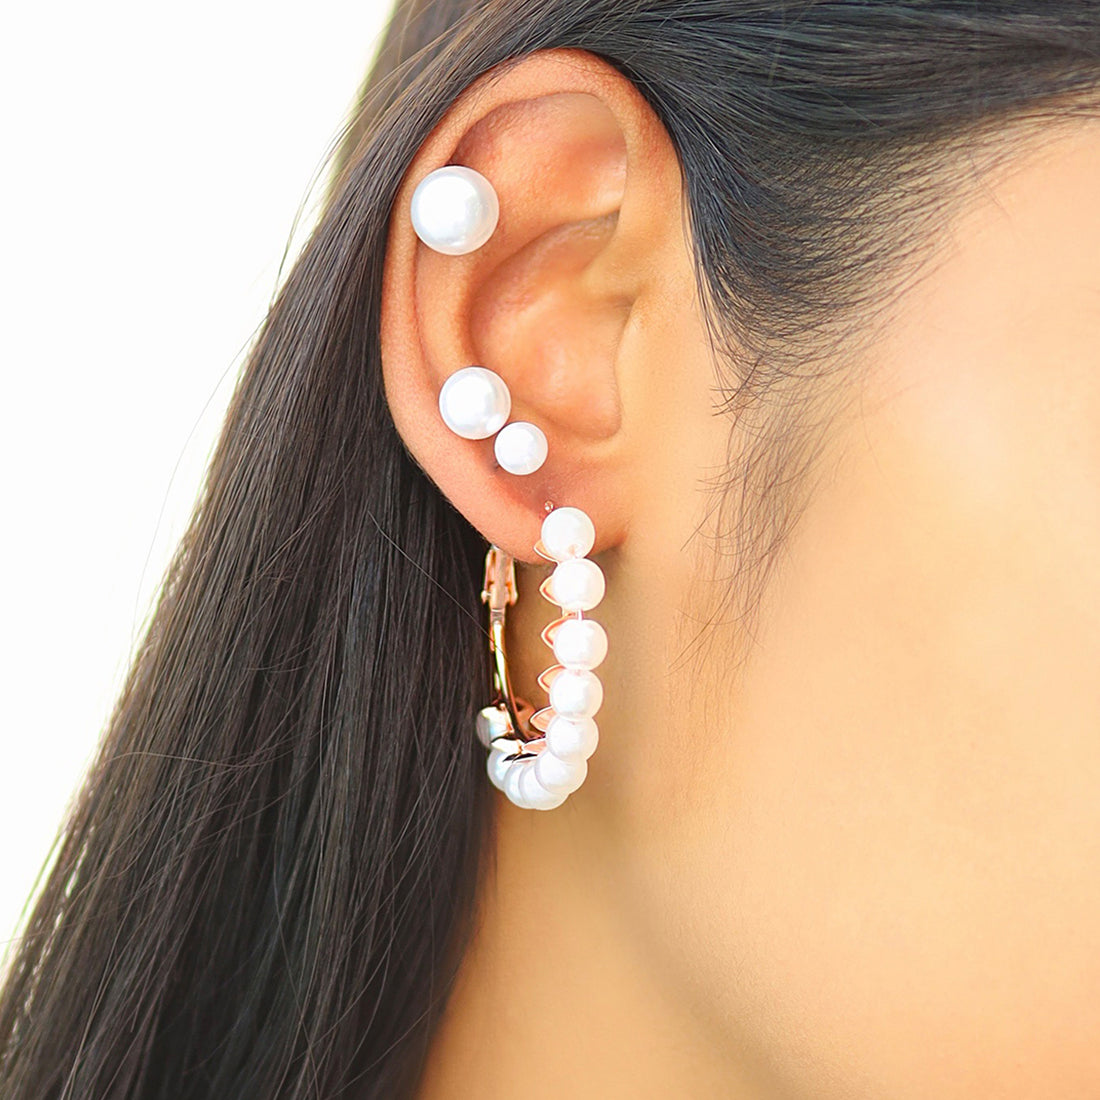 Set Of 4 Pearl Studs In Different Sizes & Rose Gold-Toned Pearl Studded Hoop Earrings